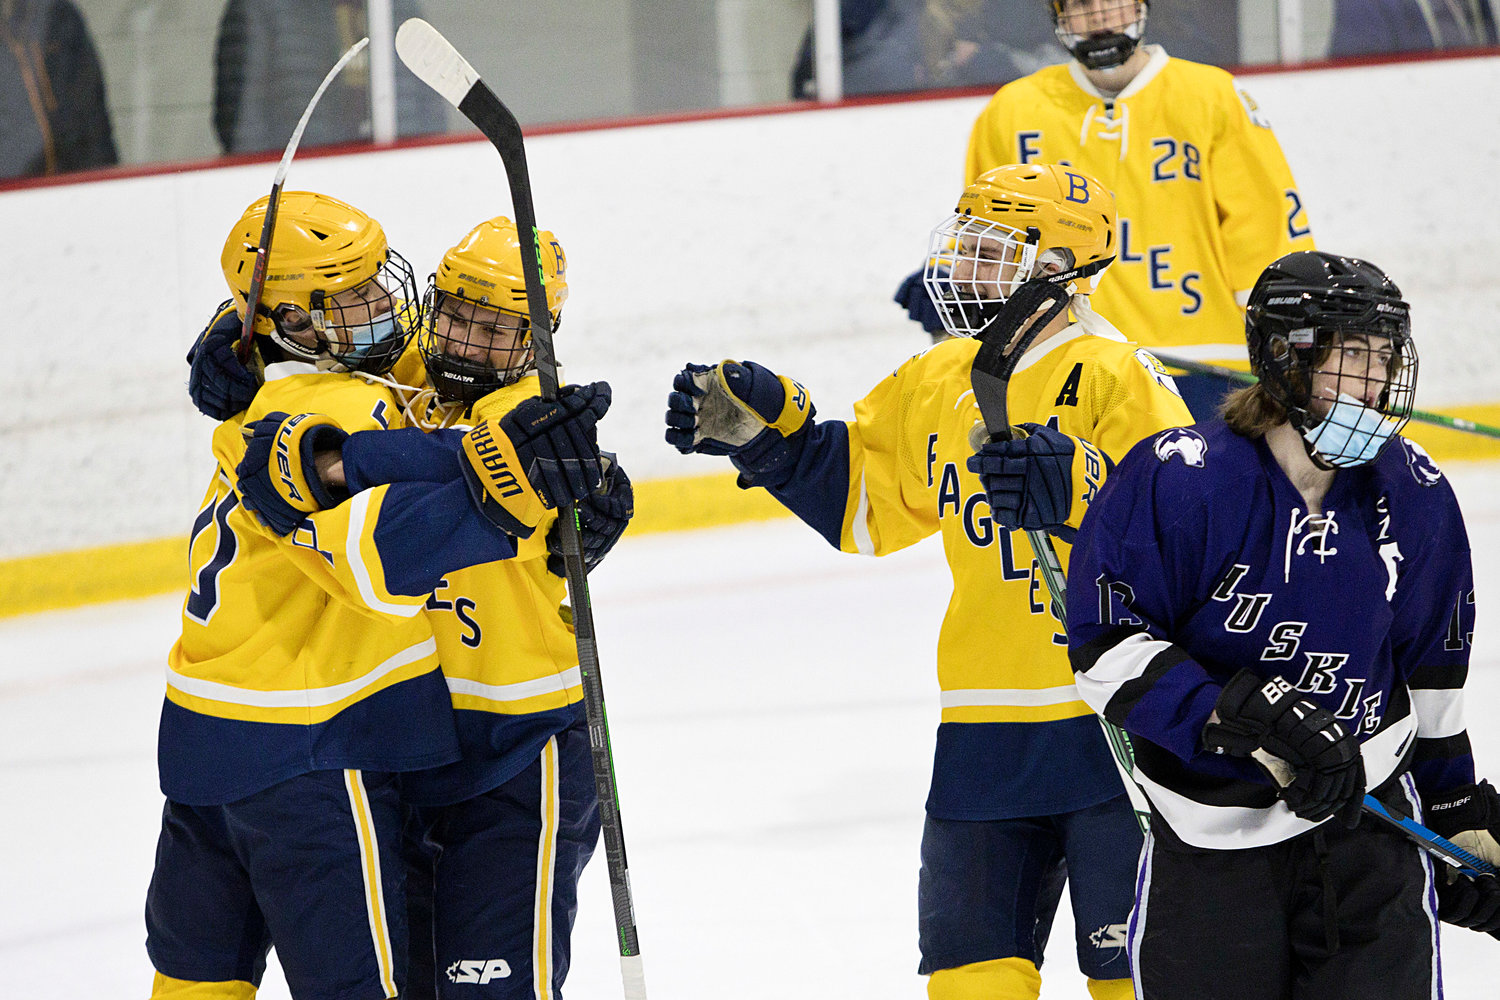 The Eagles celebrate a goal against the Huskies on Wednesday night, Jan. 5.